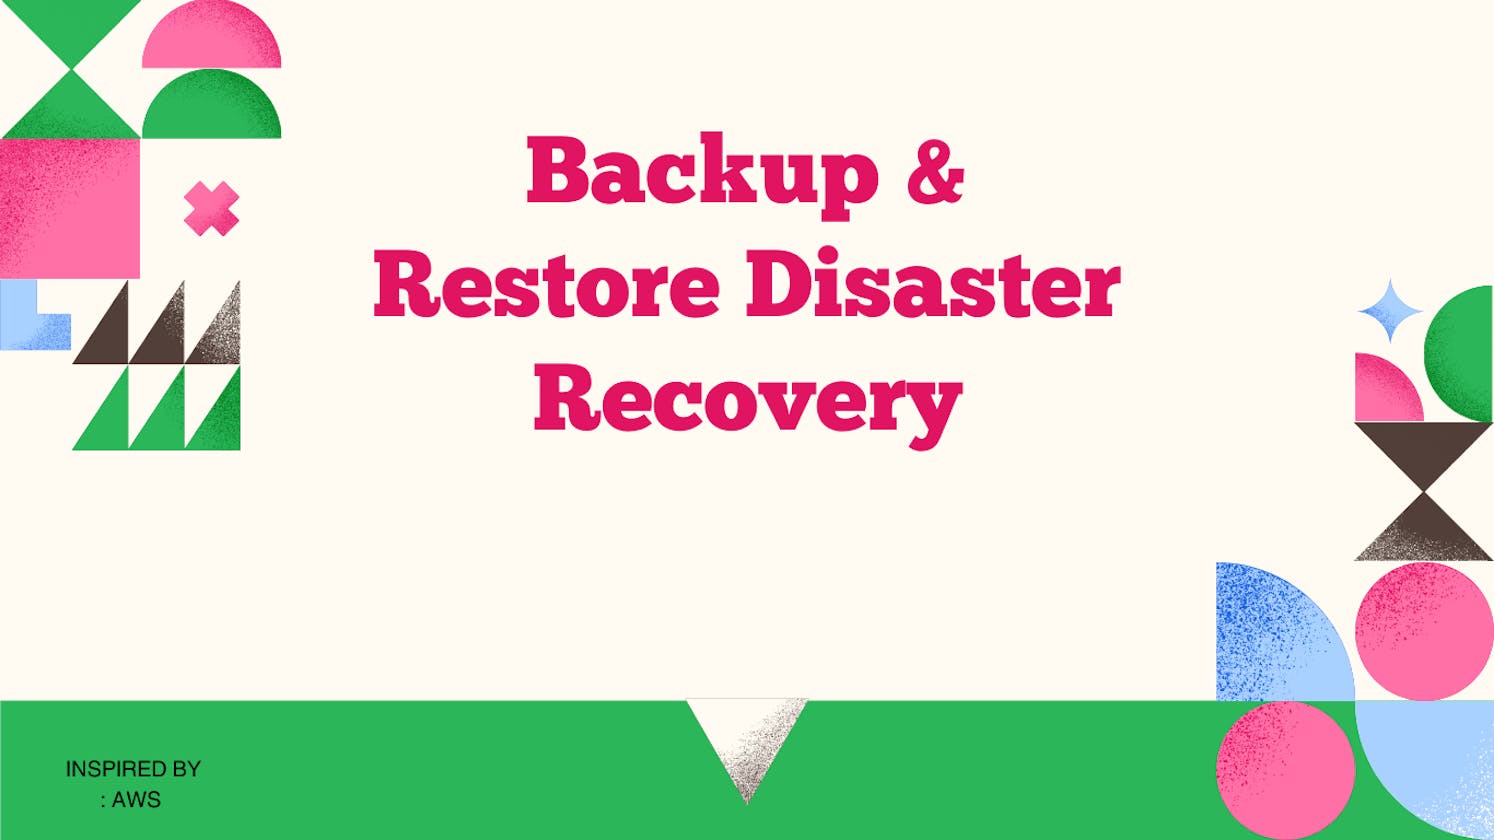 Mastering Resilience: AWS Disaster Recovery Strategy through Backup and Restore